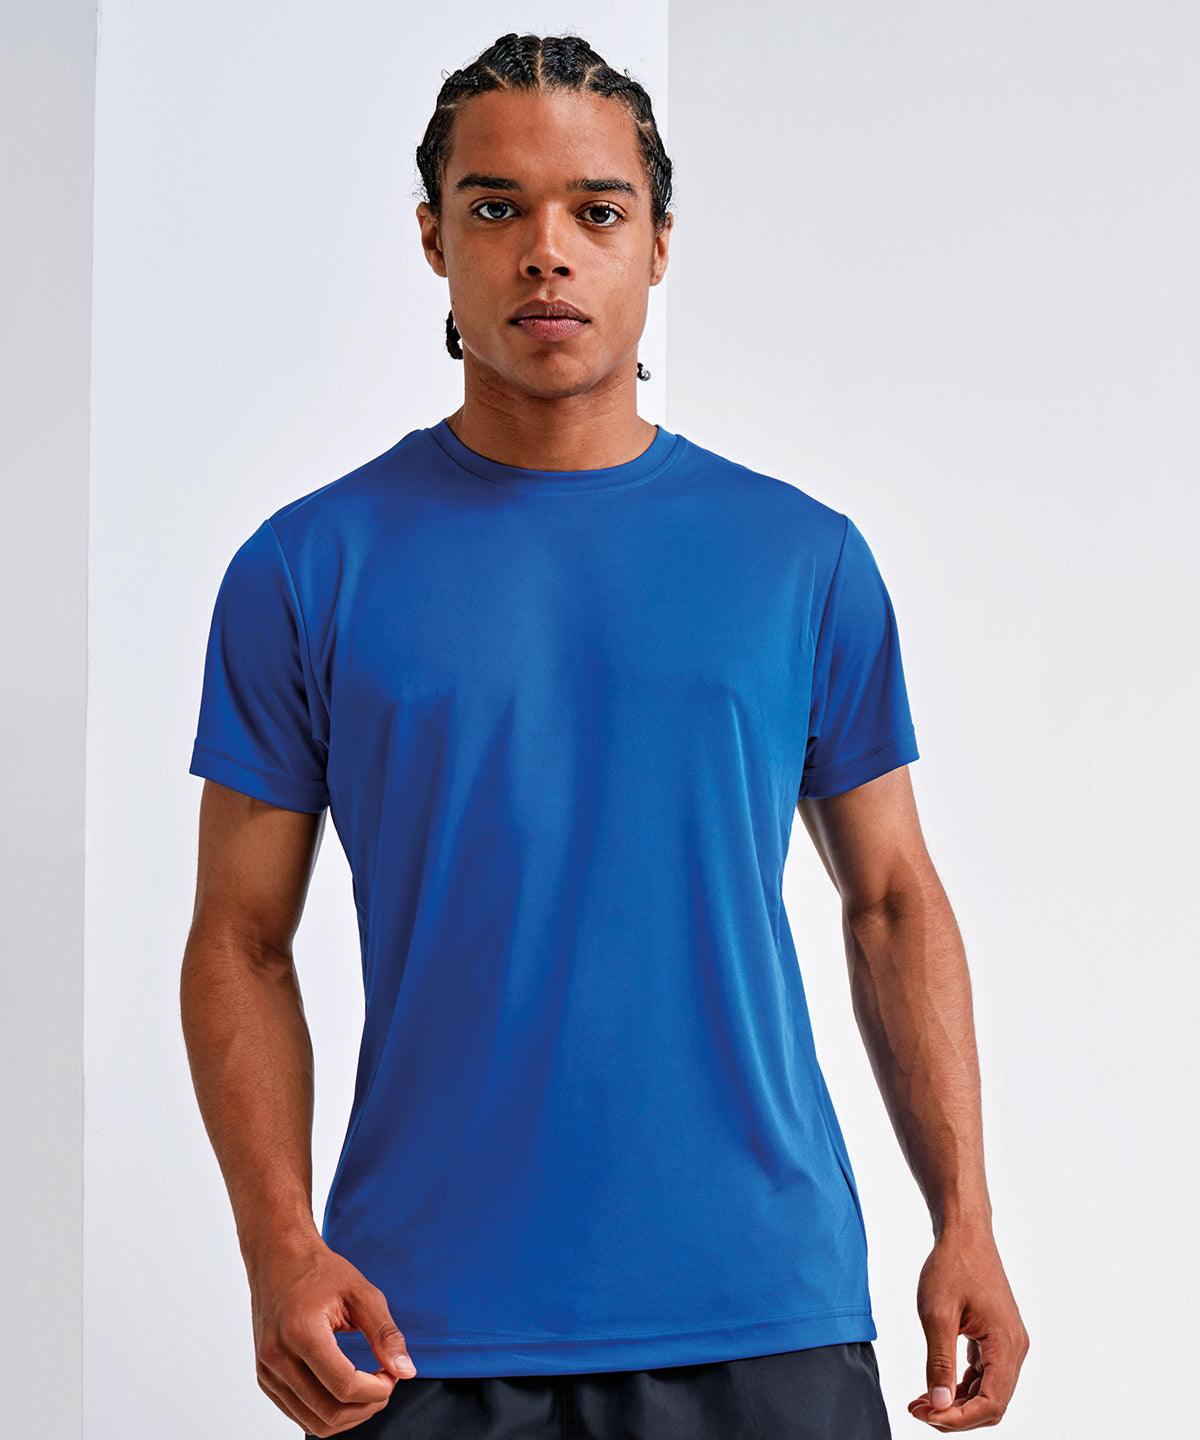 Orange - TriDri® performance t-shirt T-Shirts TriDri® Activewear & Performance, Athleisurewear, Back to the Gym, Exclusives, Gymwear, Must Haves, New Colours For 2022, Outdoor Sports, Plus Sizes, Rebrandable, Sports & Leisure, T-Shirts & Vests, Team Sportswear, UPF Protection Schoolwear Centres